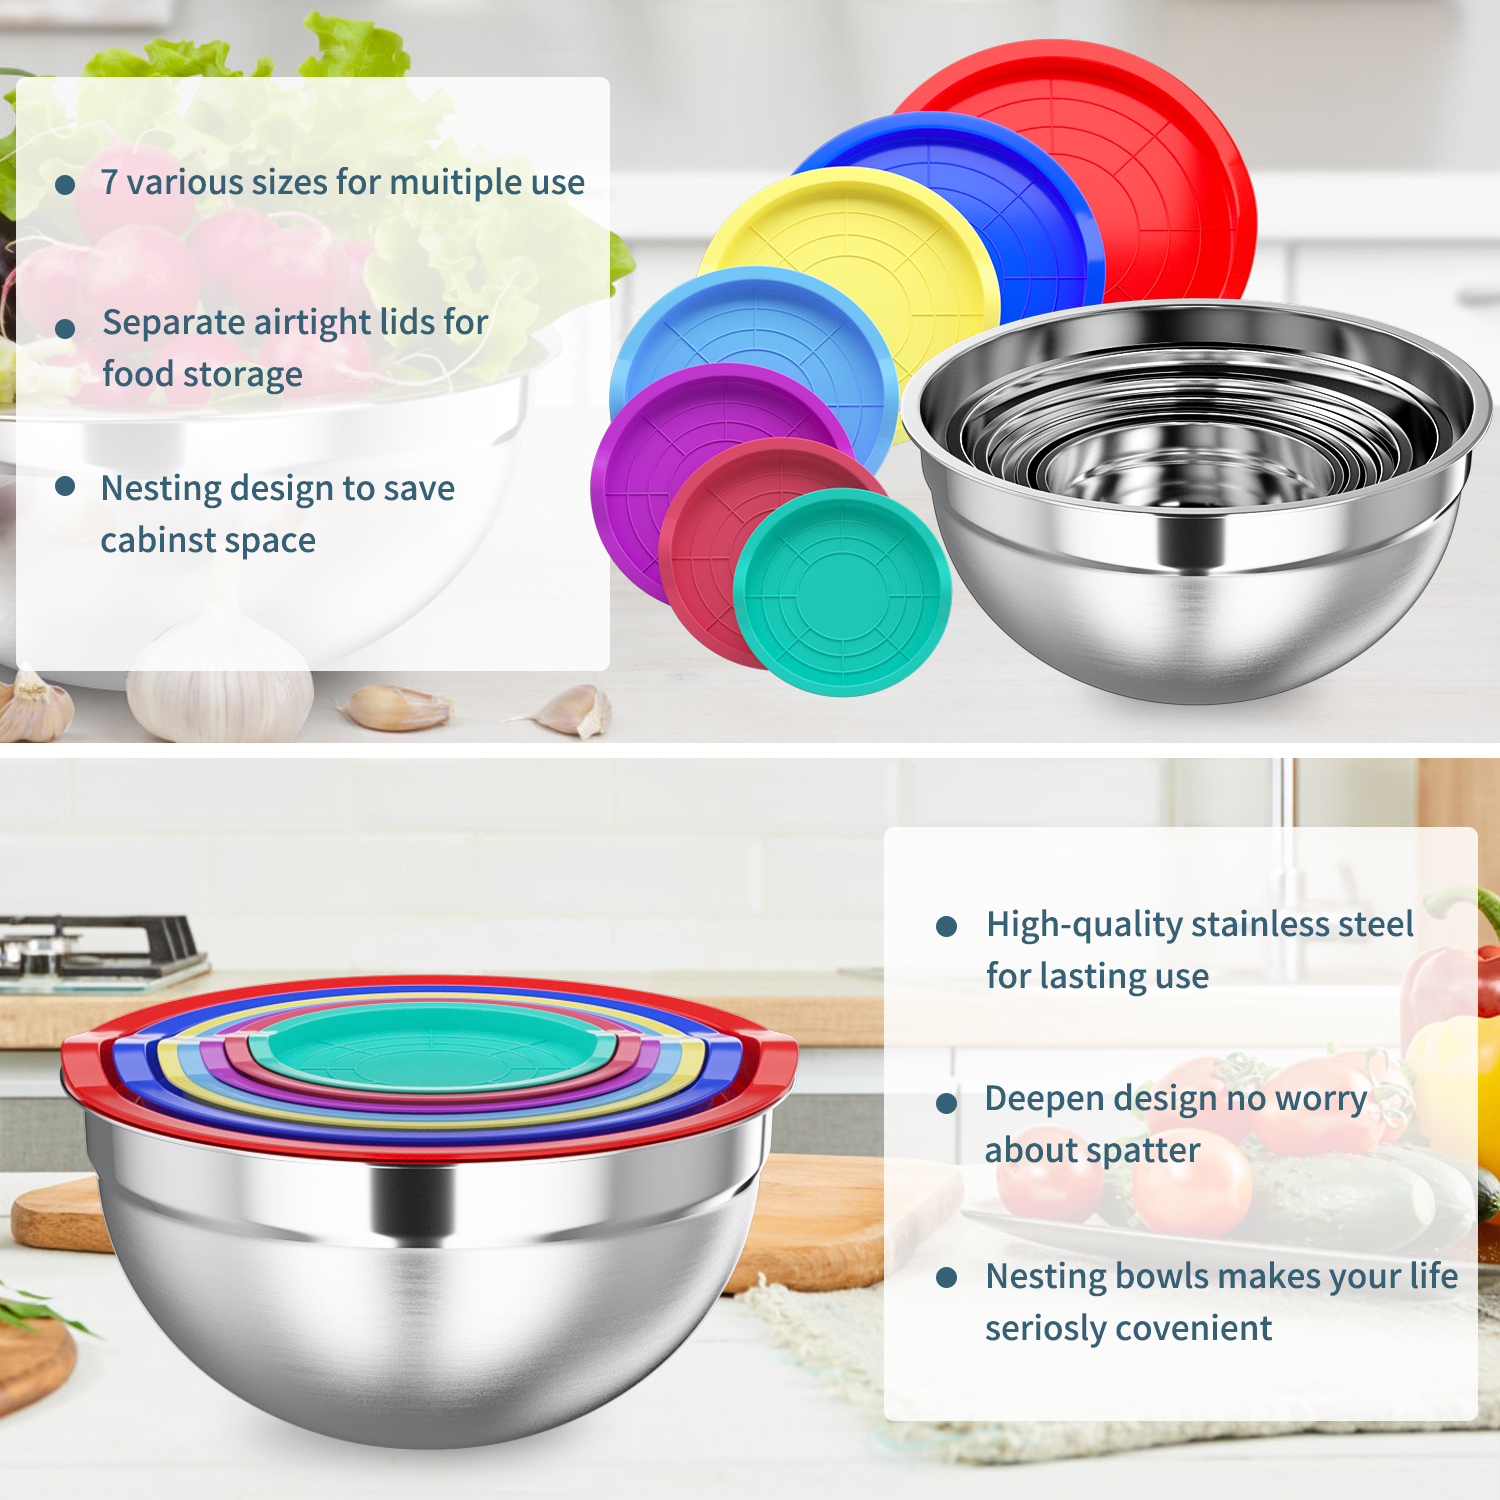 TINANA Mixing Bowls with Lids: Stainless Steel Mixing Bowls Set - 7PCS Metal Nesting Mixing Bowls for Kitchen, Size 7, 4.5, 3, 2, 1.5, 1, 0.7 QT, Great for Prep, Baking, Serving-Multi-Color - image 2 of 7